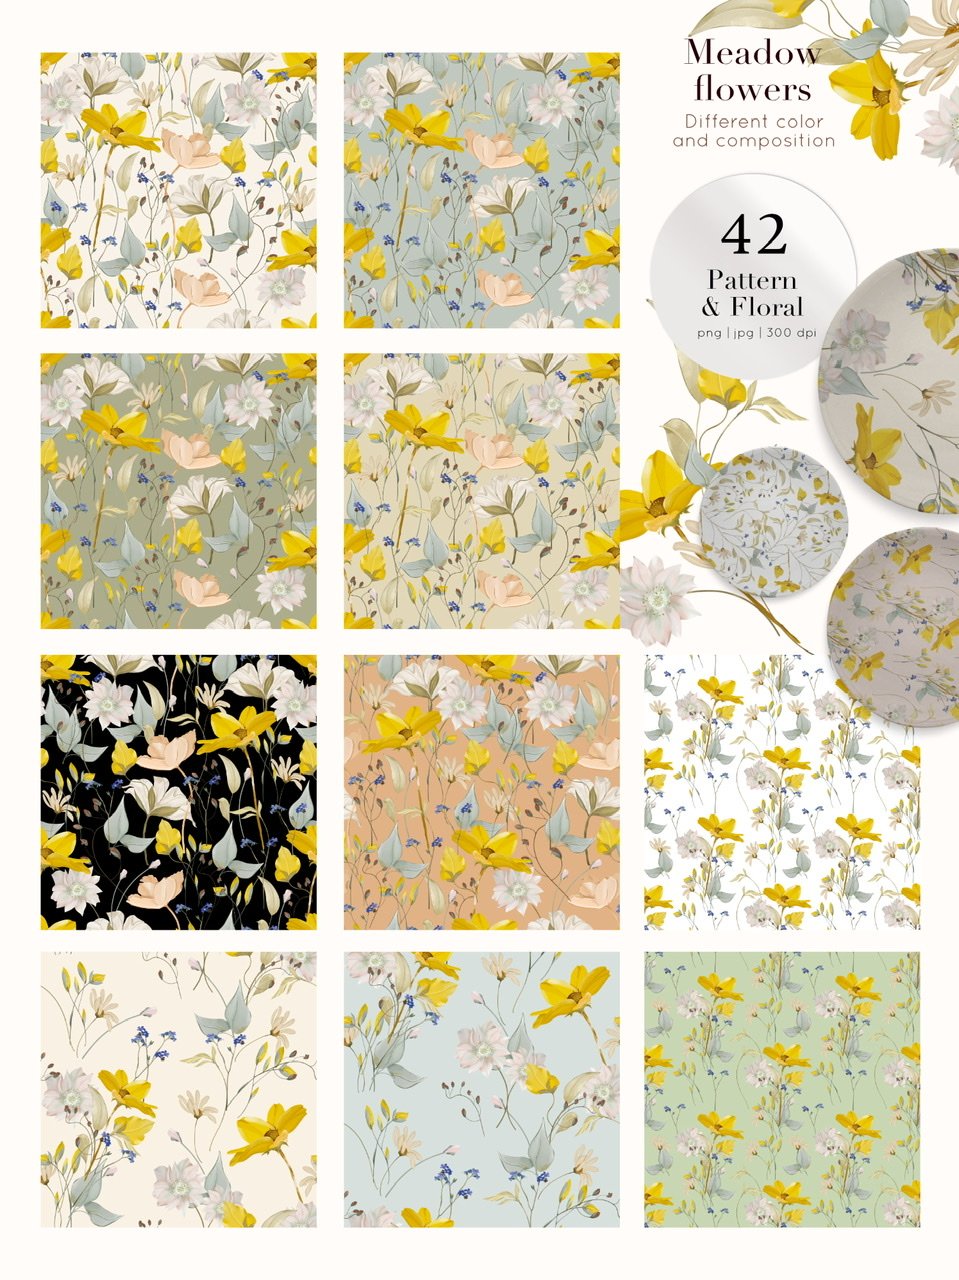 A set of 10 different meadow flowers patterns.